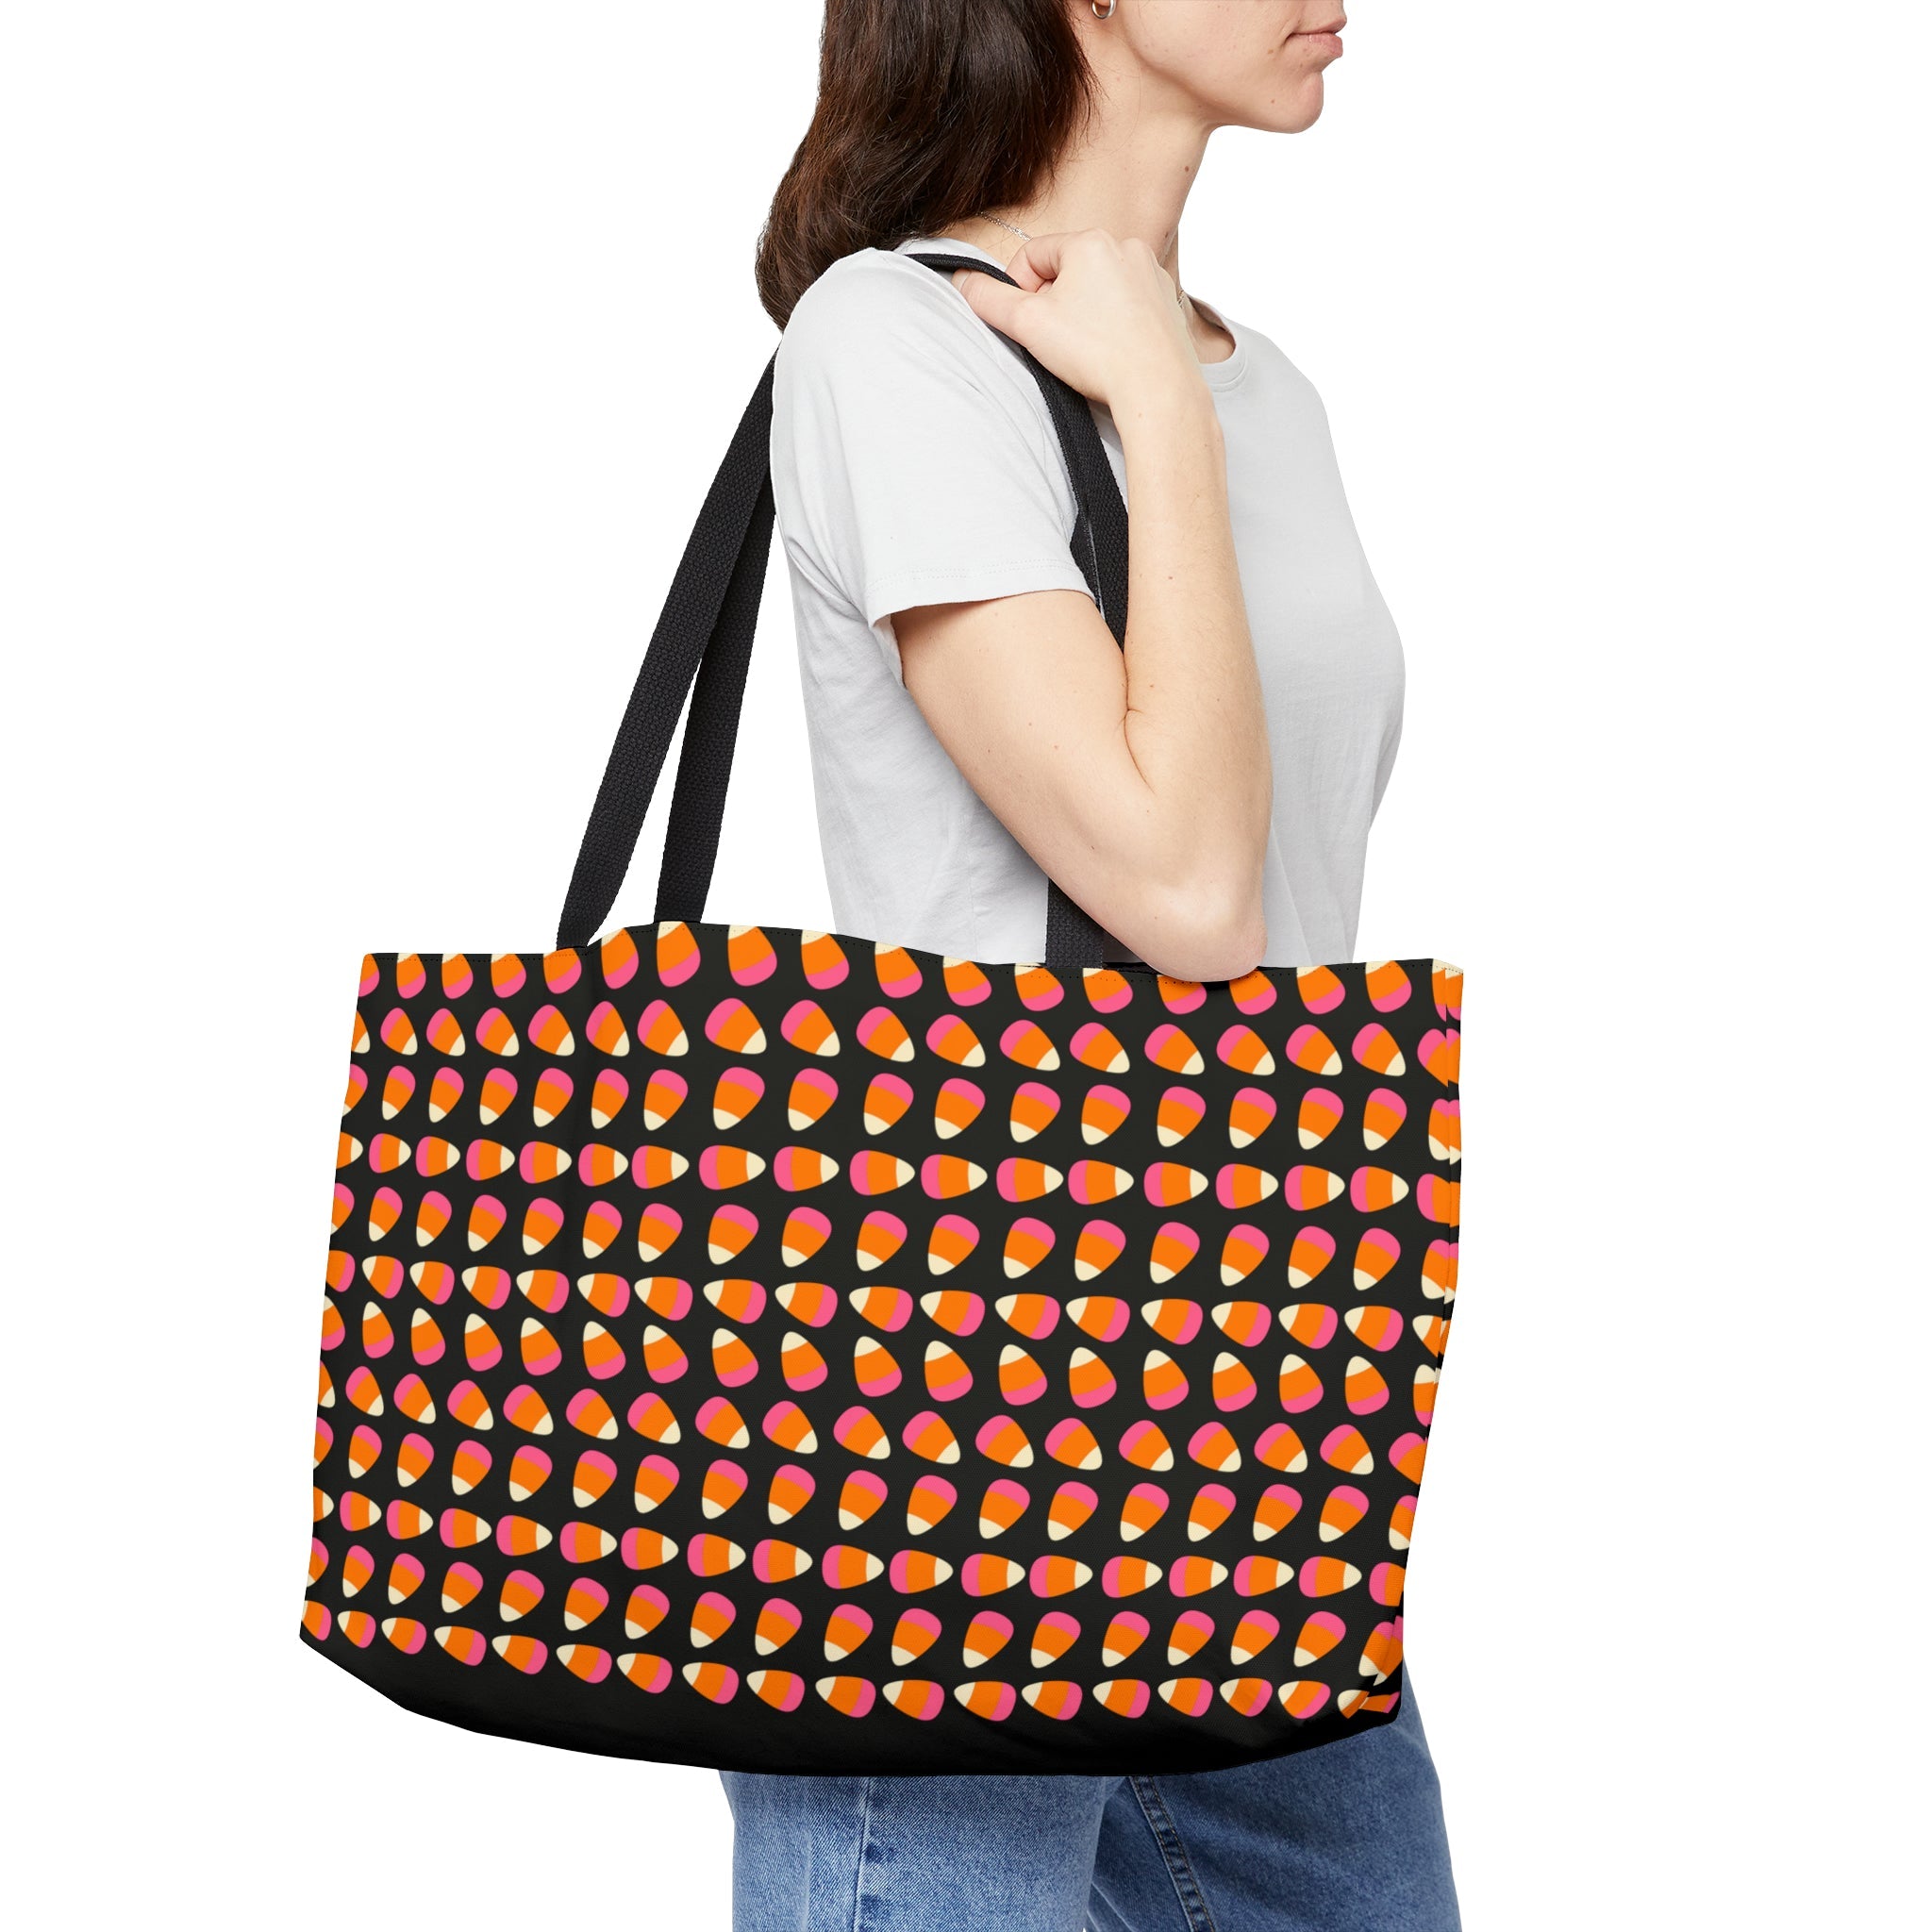 Candy Corn Halloween Large Tote Bag - The Kindness Cause